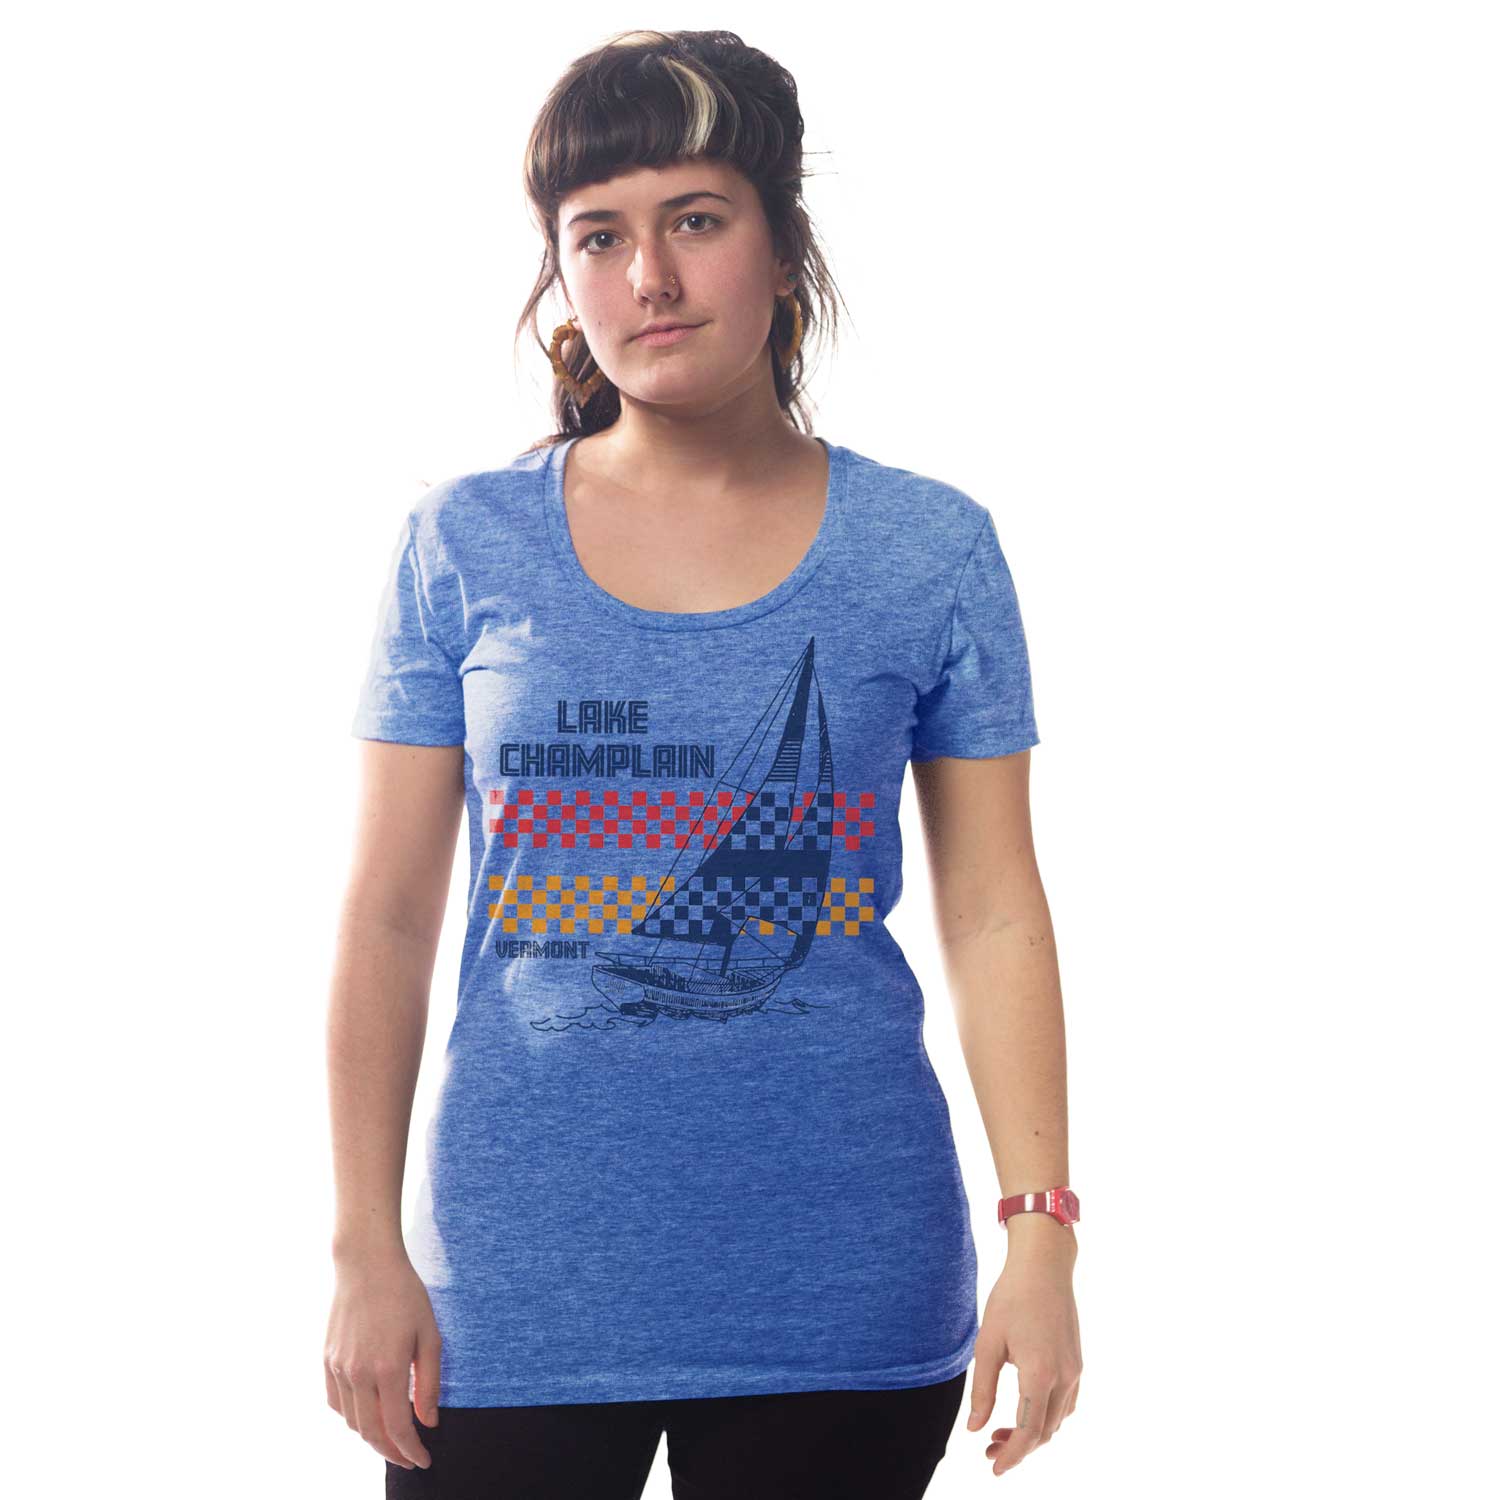 Women's Lake Champlain Vermont Vintage T-shirt | Cool Retro Sailboat Graphic Tee | Solid Threads